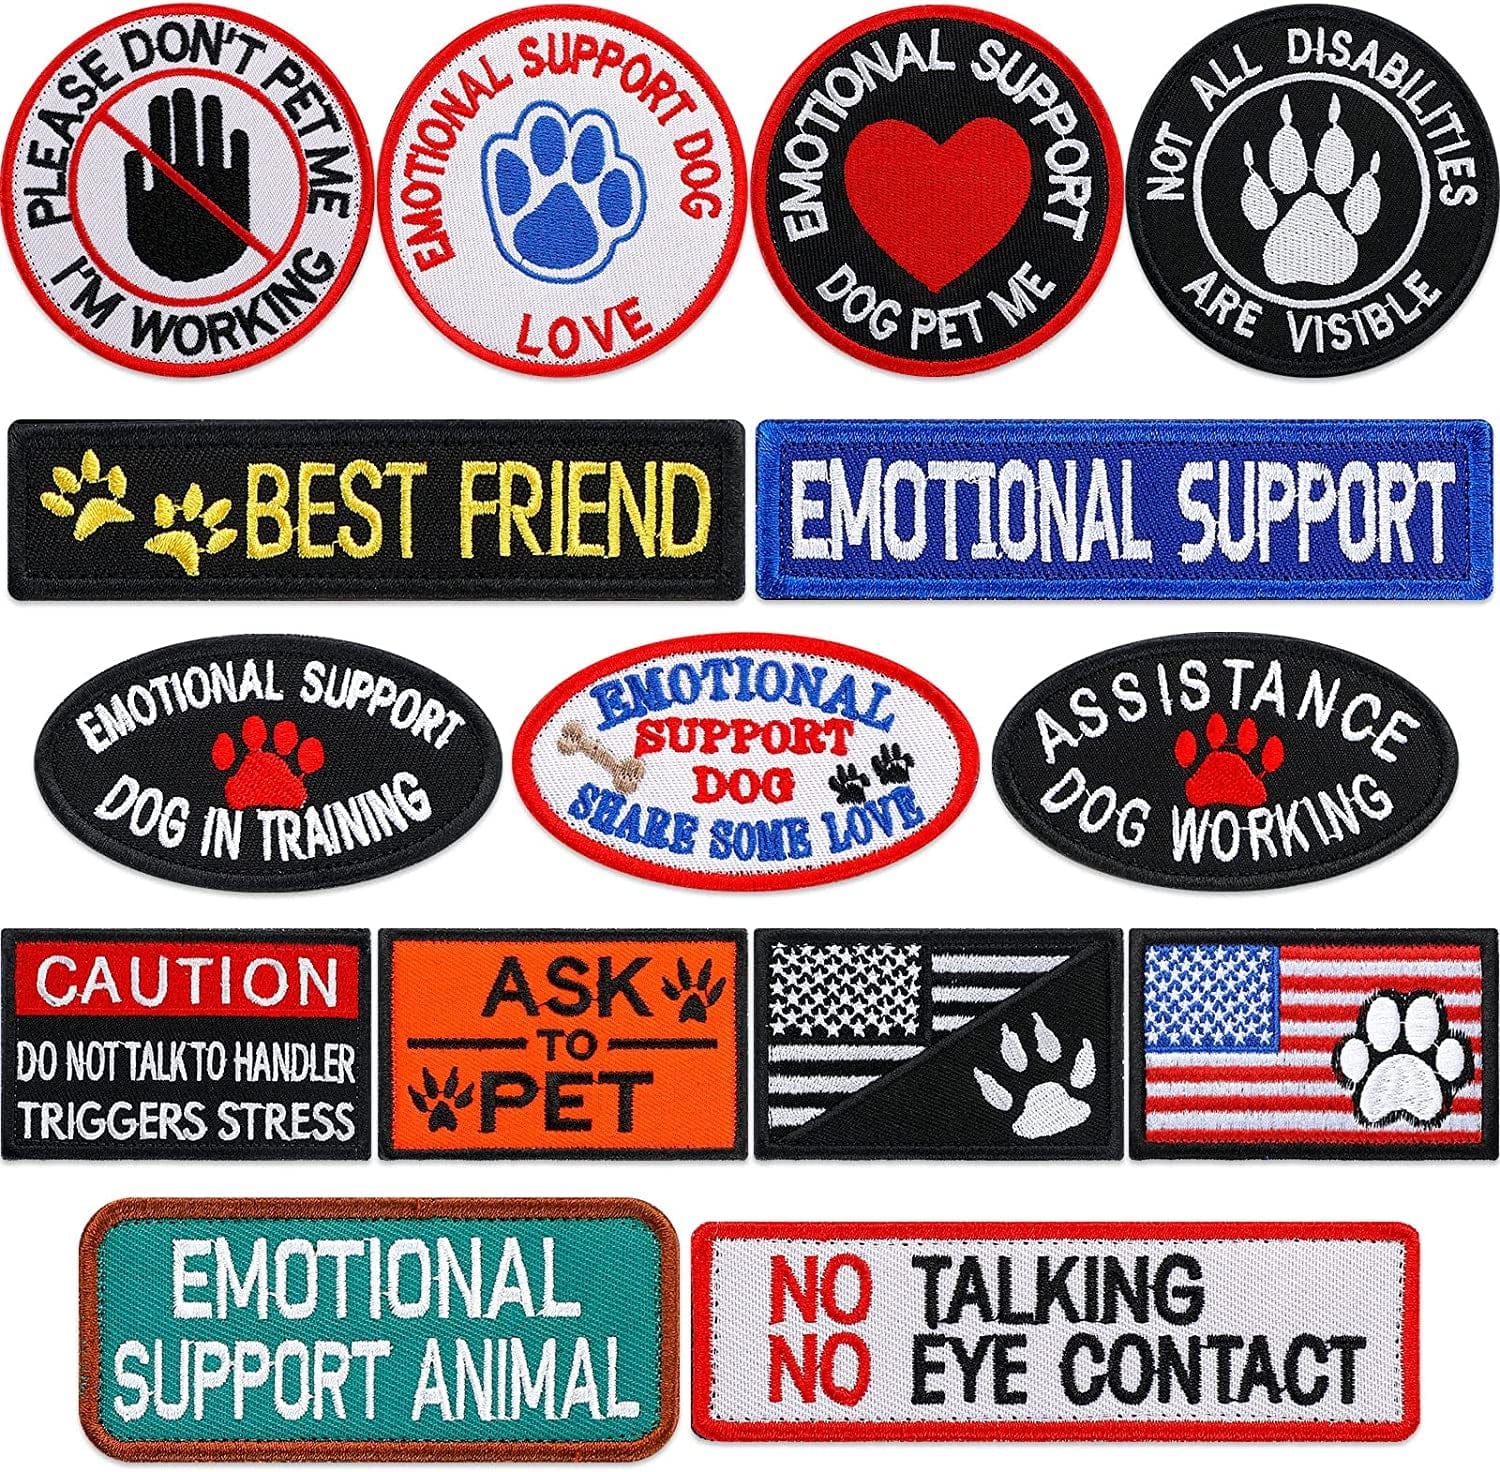 SERVICE DOG Patches,IN TRAINING,DO NOT PET, EMOTIONAL SUPPORT